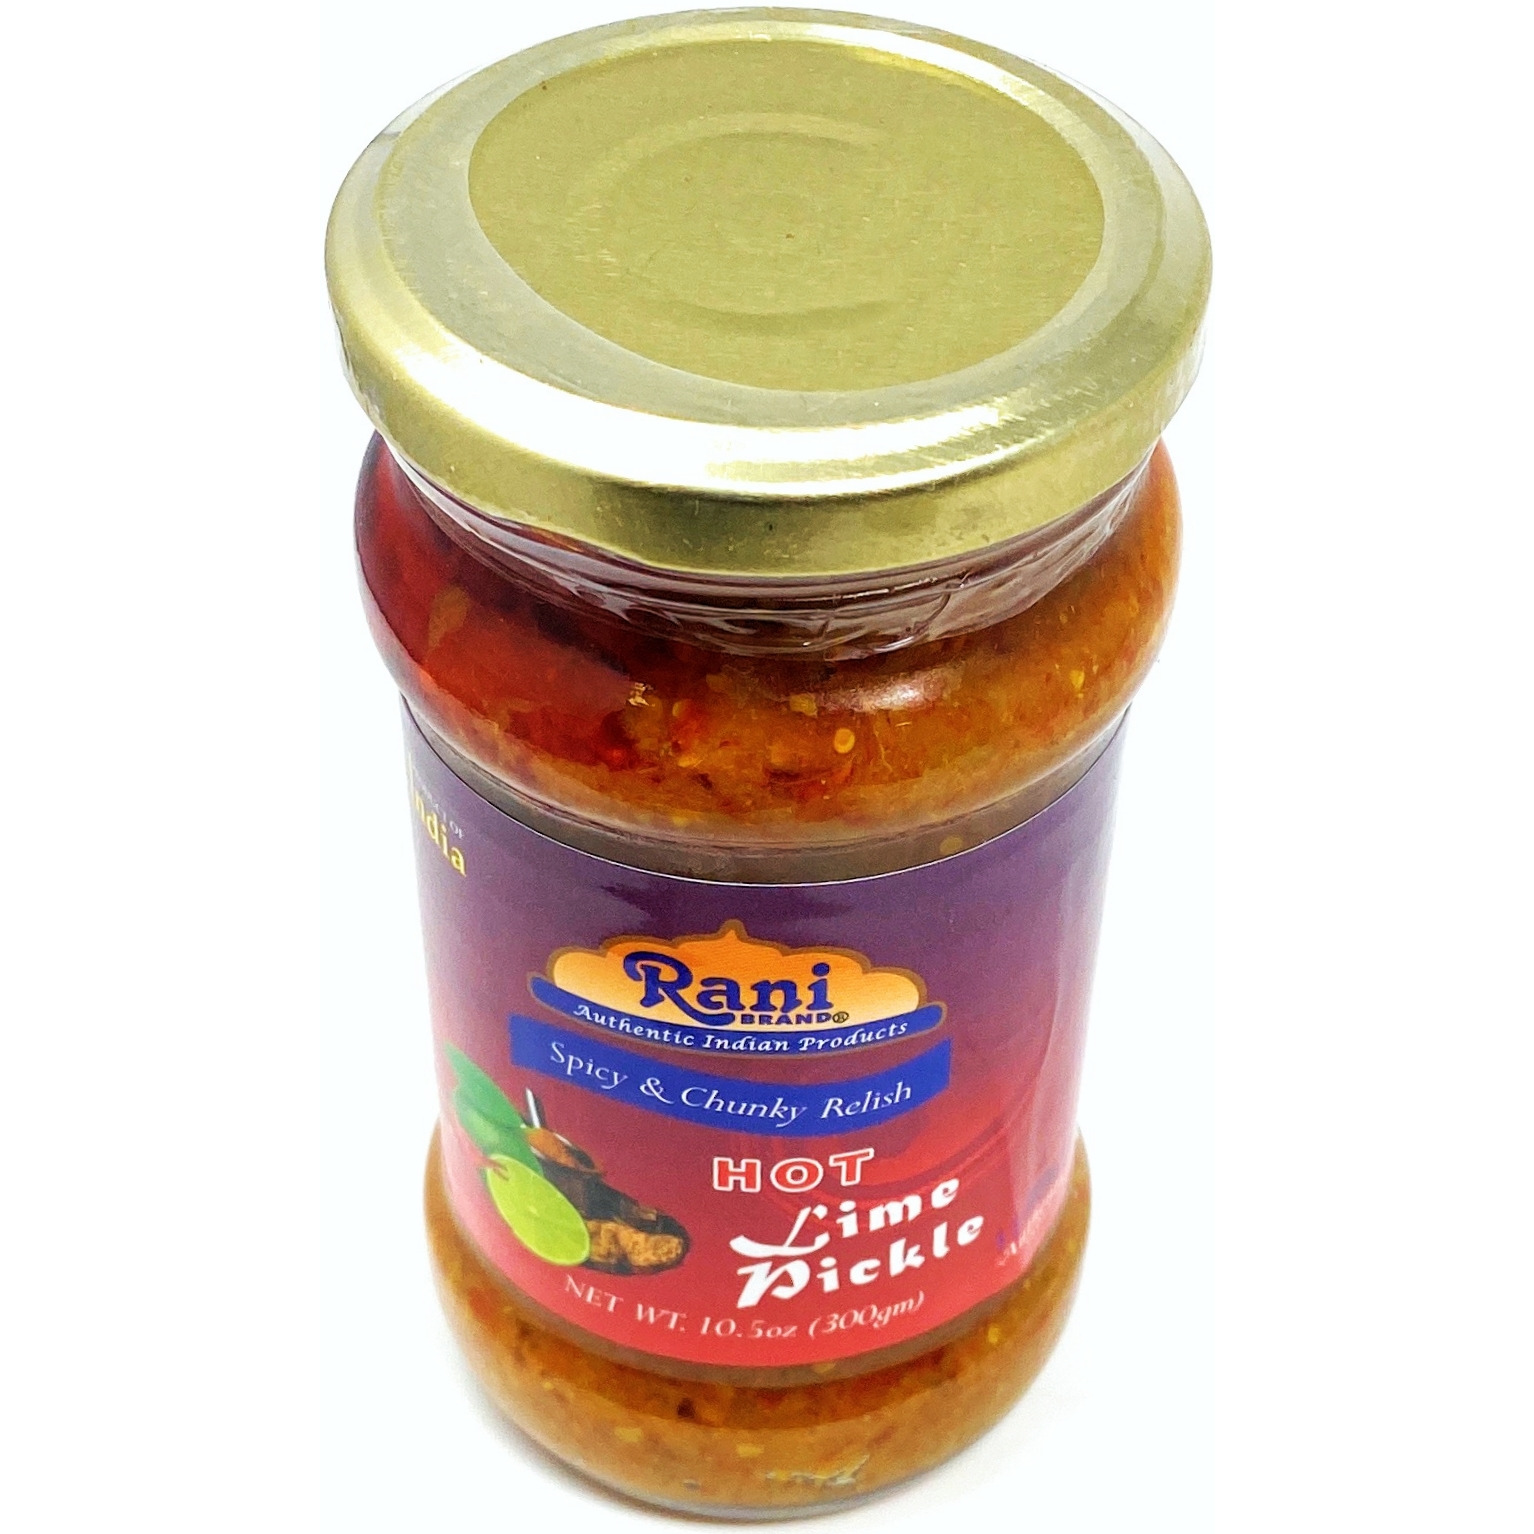 Rani Lime Pickle Hot (Achar, Spicy Indian Relish) 10.5oz (300g) ~ Glass Jar, All Natural | Vegan | Gluten Free | NON-GMO | No Colors | Popular Indian Condiment, Indian Origin